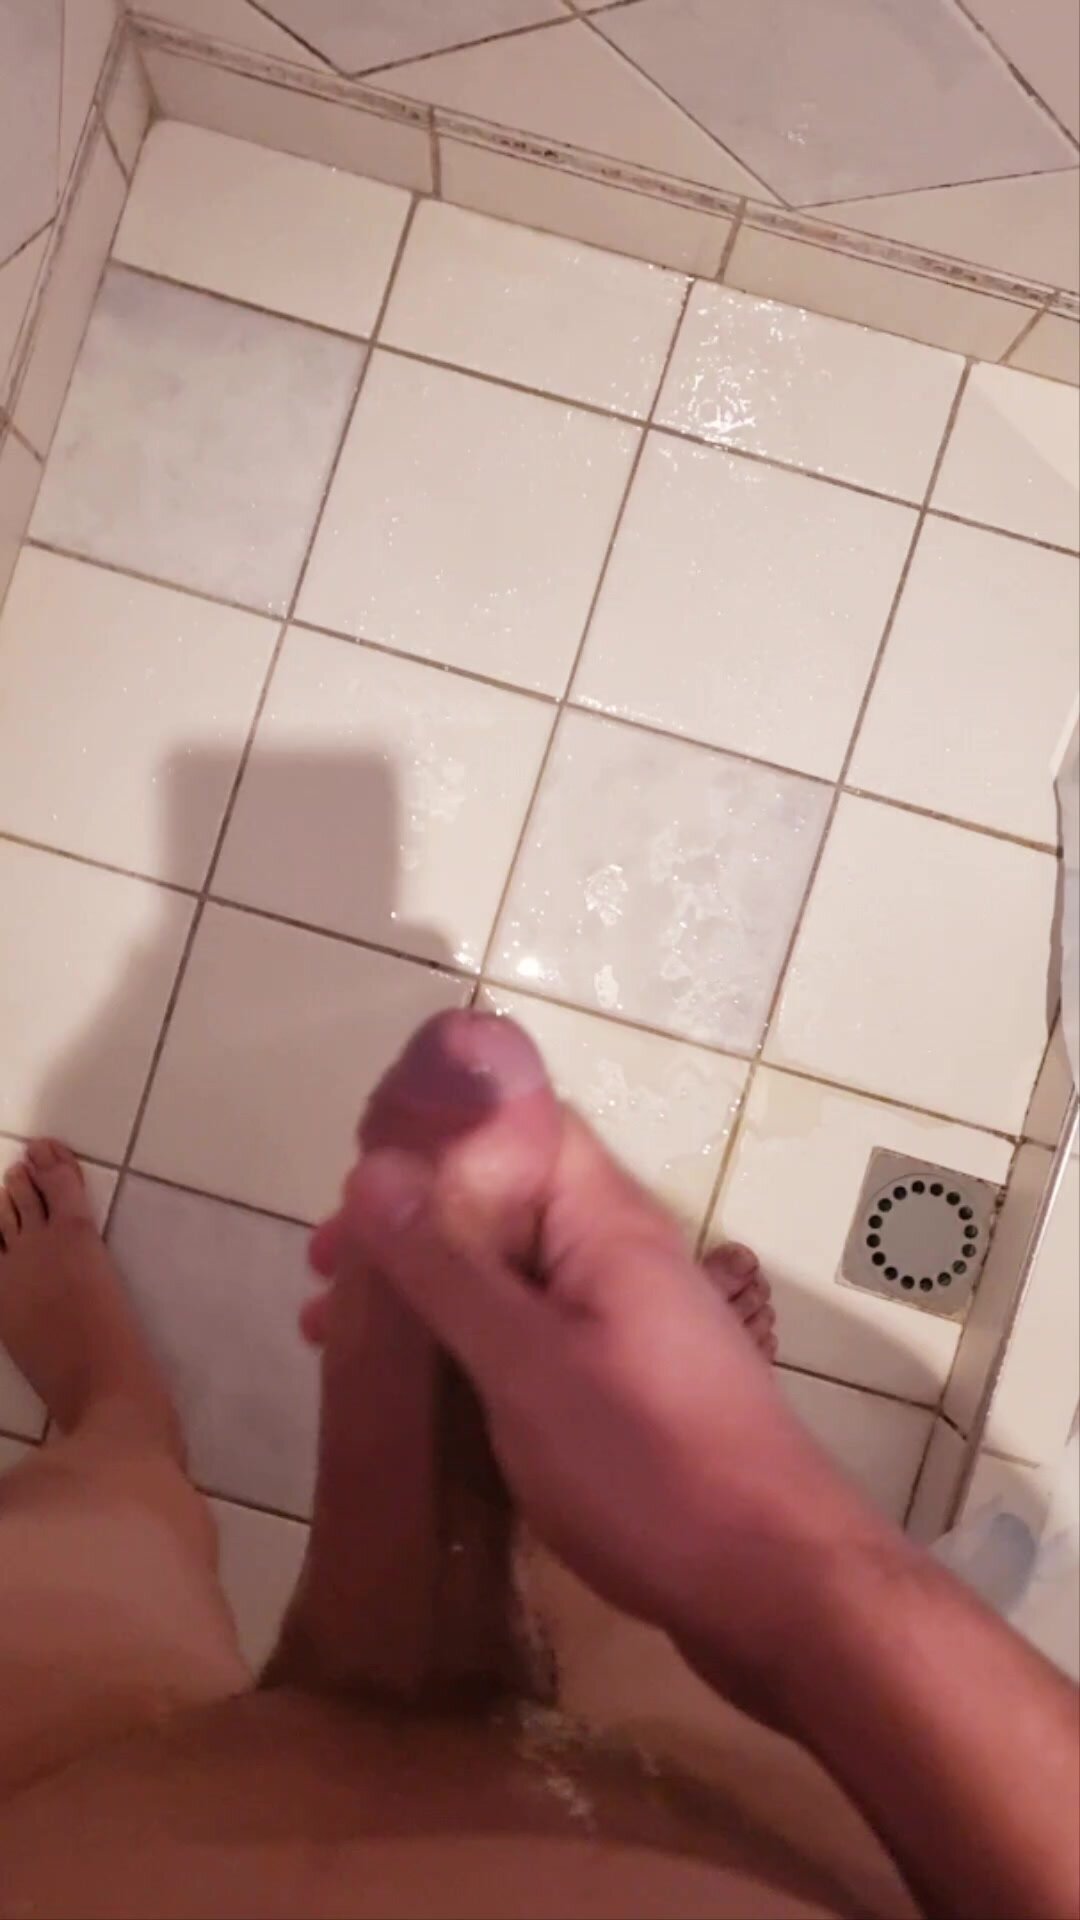 Piss in shower - video 10